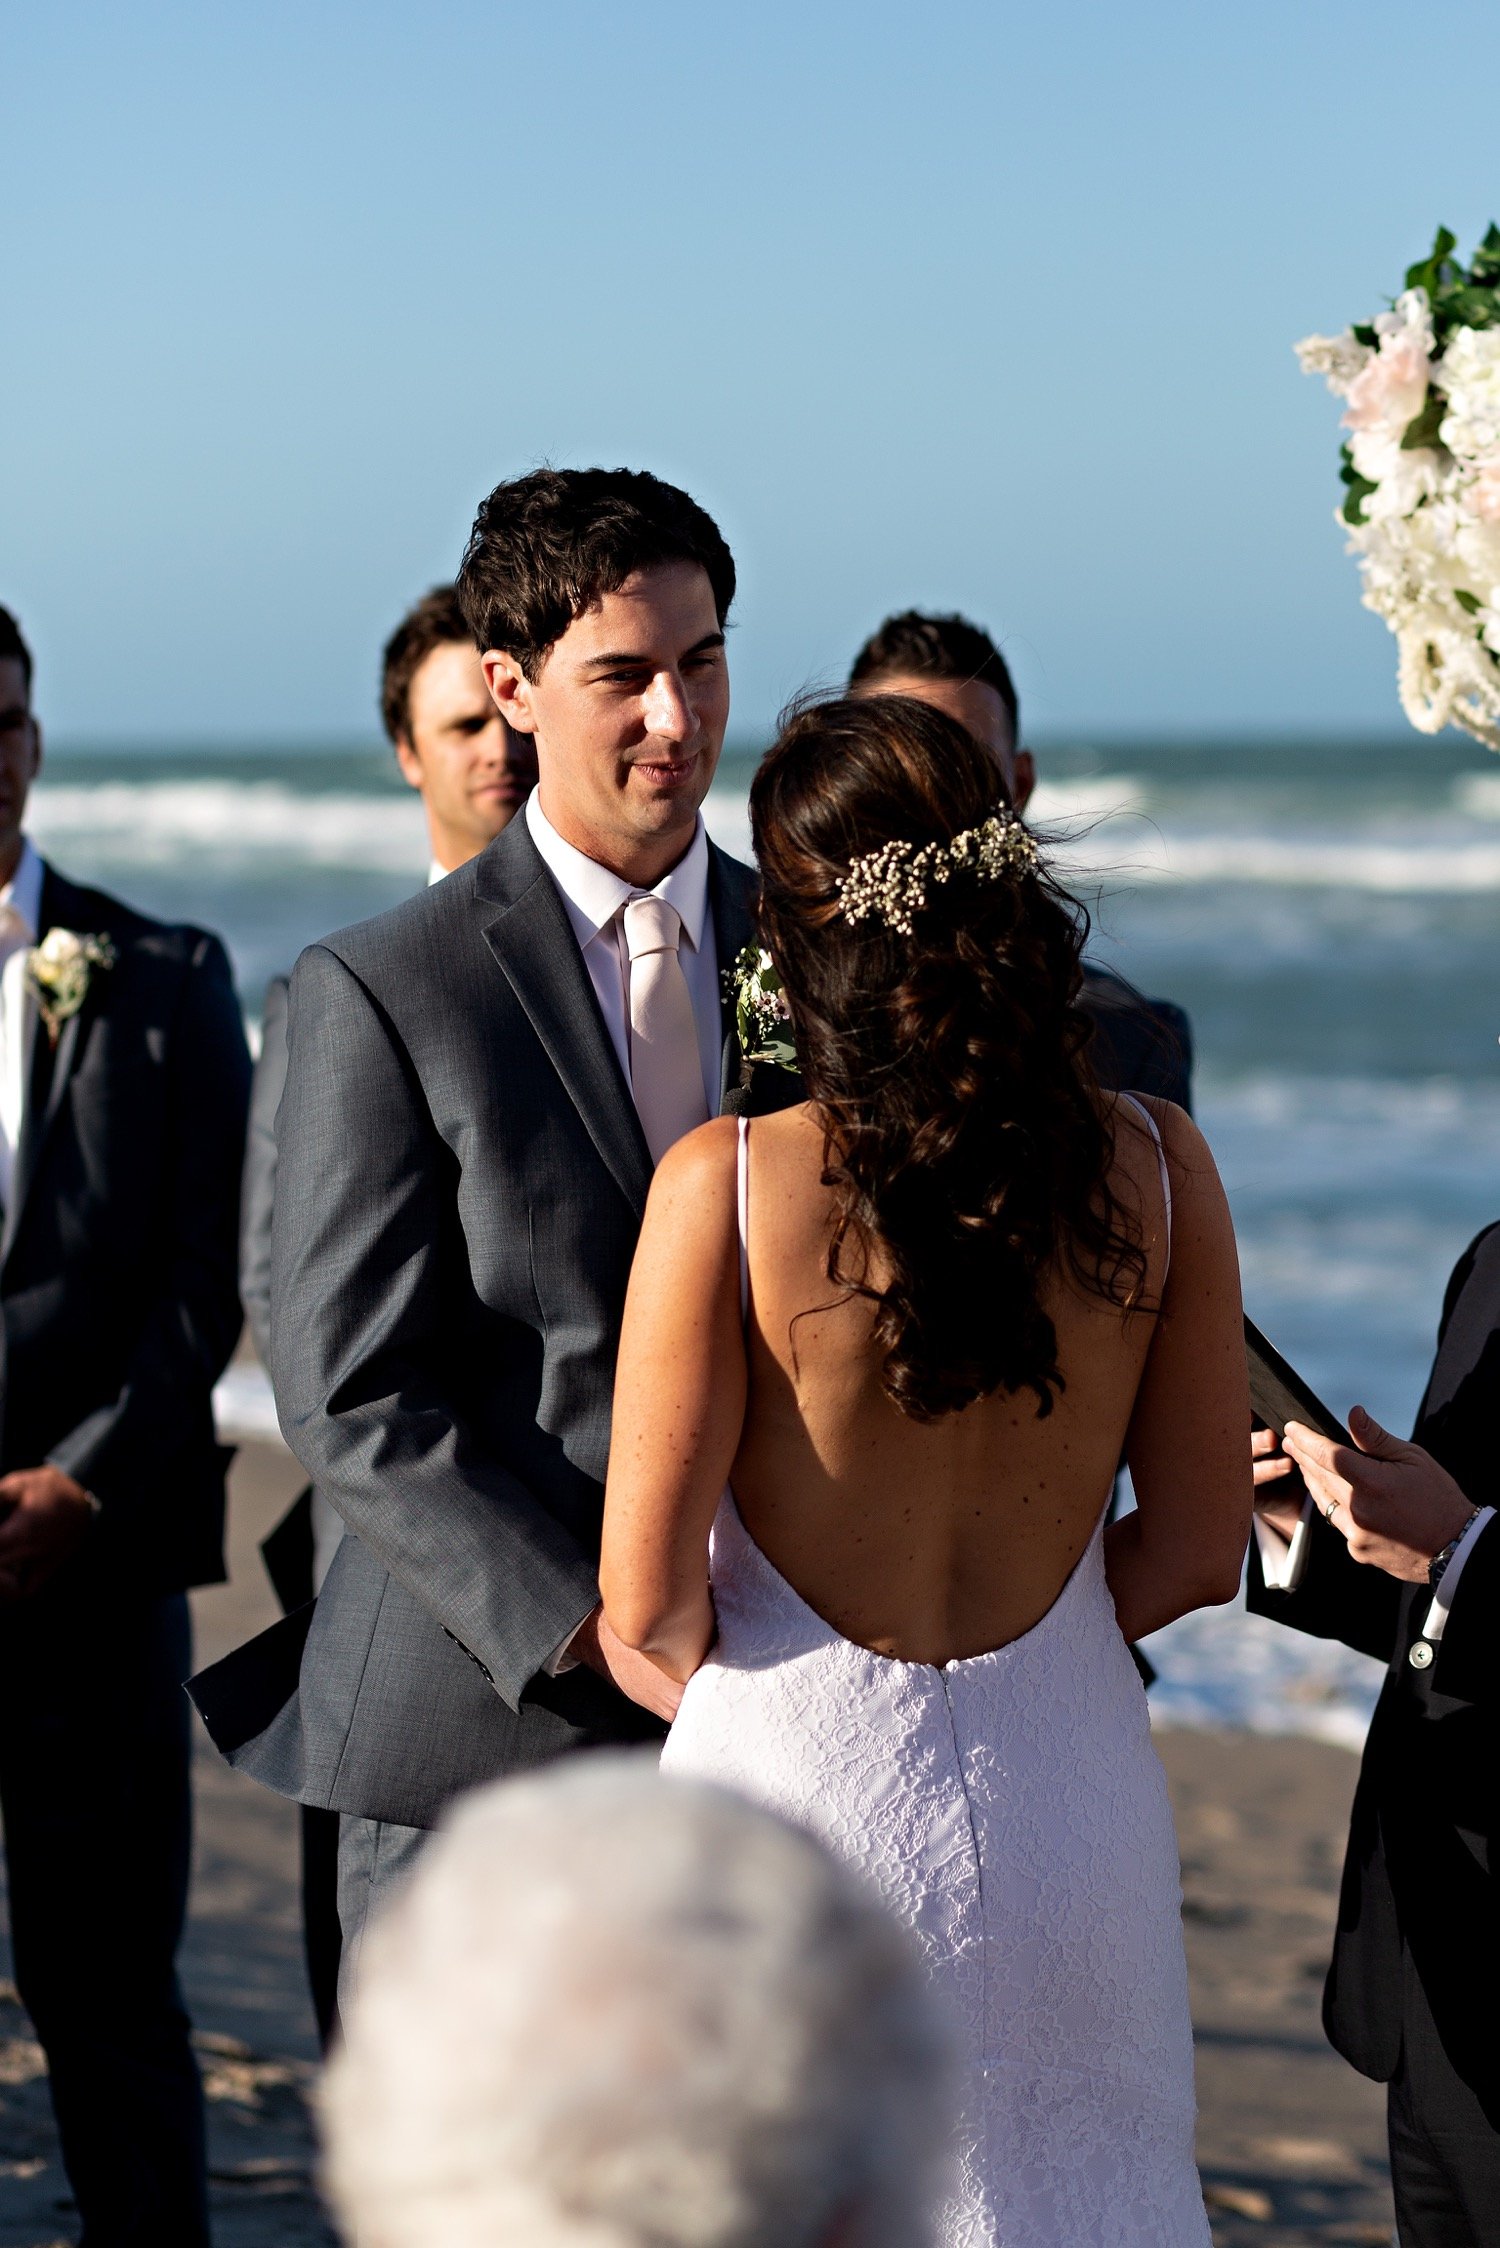 18_Jensen-Beach-Wedding-Jensen-Beach-Wedding-Photographer_0730_during_bride_and_standing_their_alter_Jensen_beach_at_the_groom_wedding.jpg